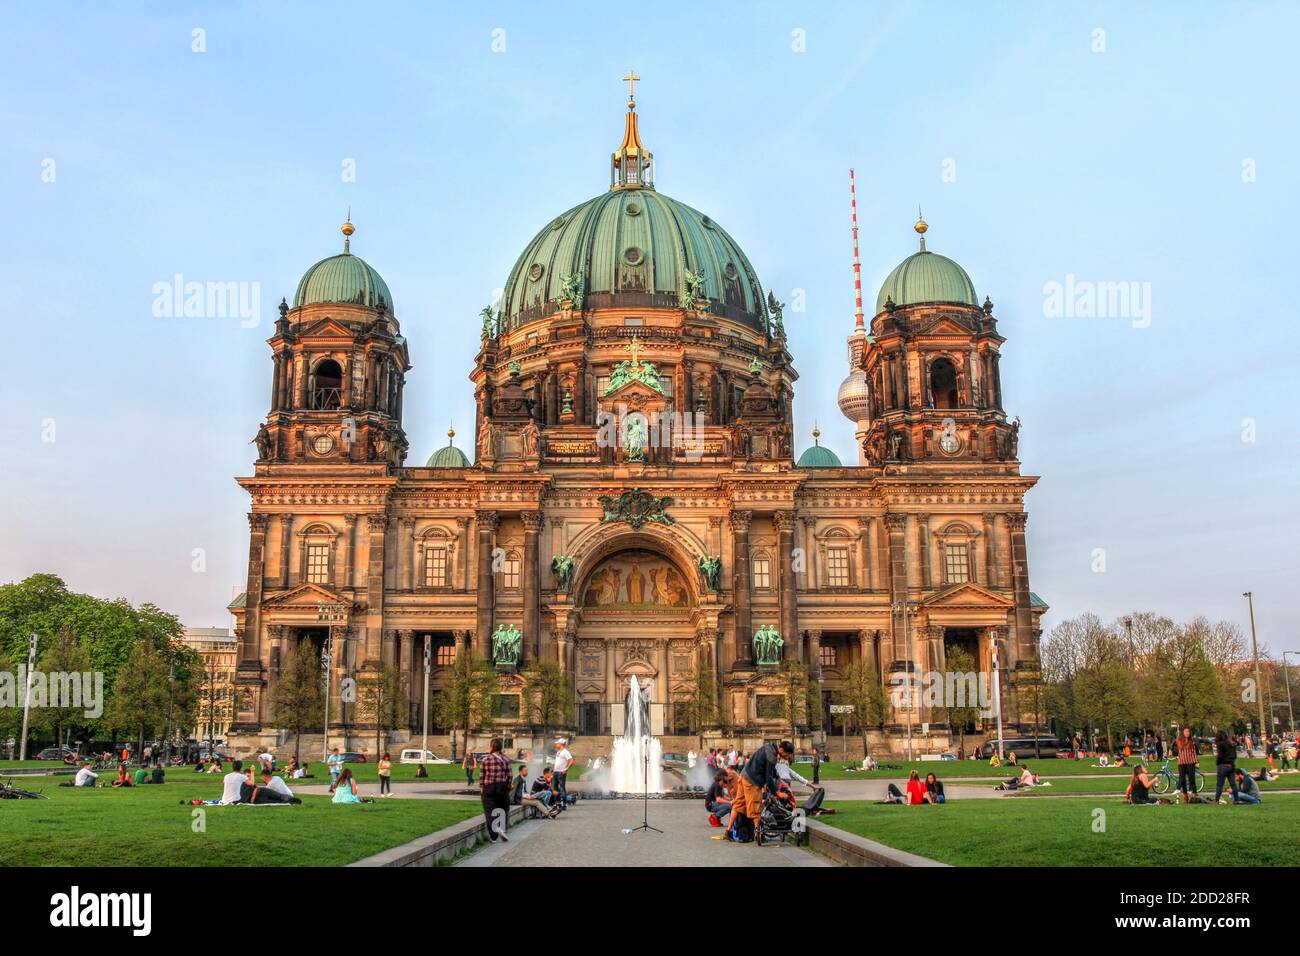 Berlin Cathedral (or Berliner Dom, or Evangelical Supreme Parish and Collegiate Church), Berlin, Germany. Stock Photo